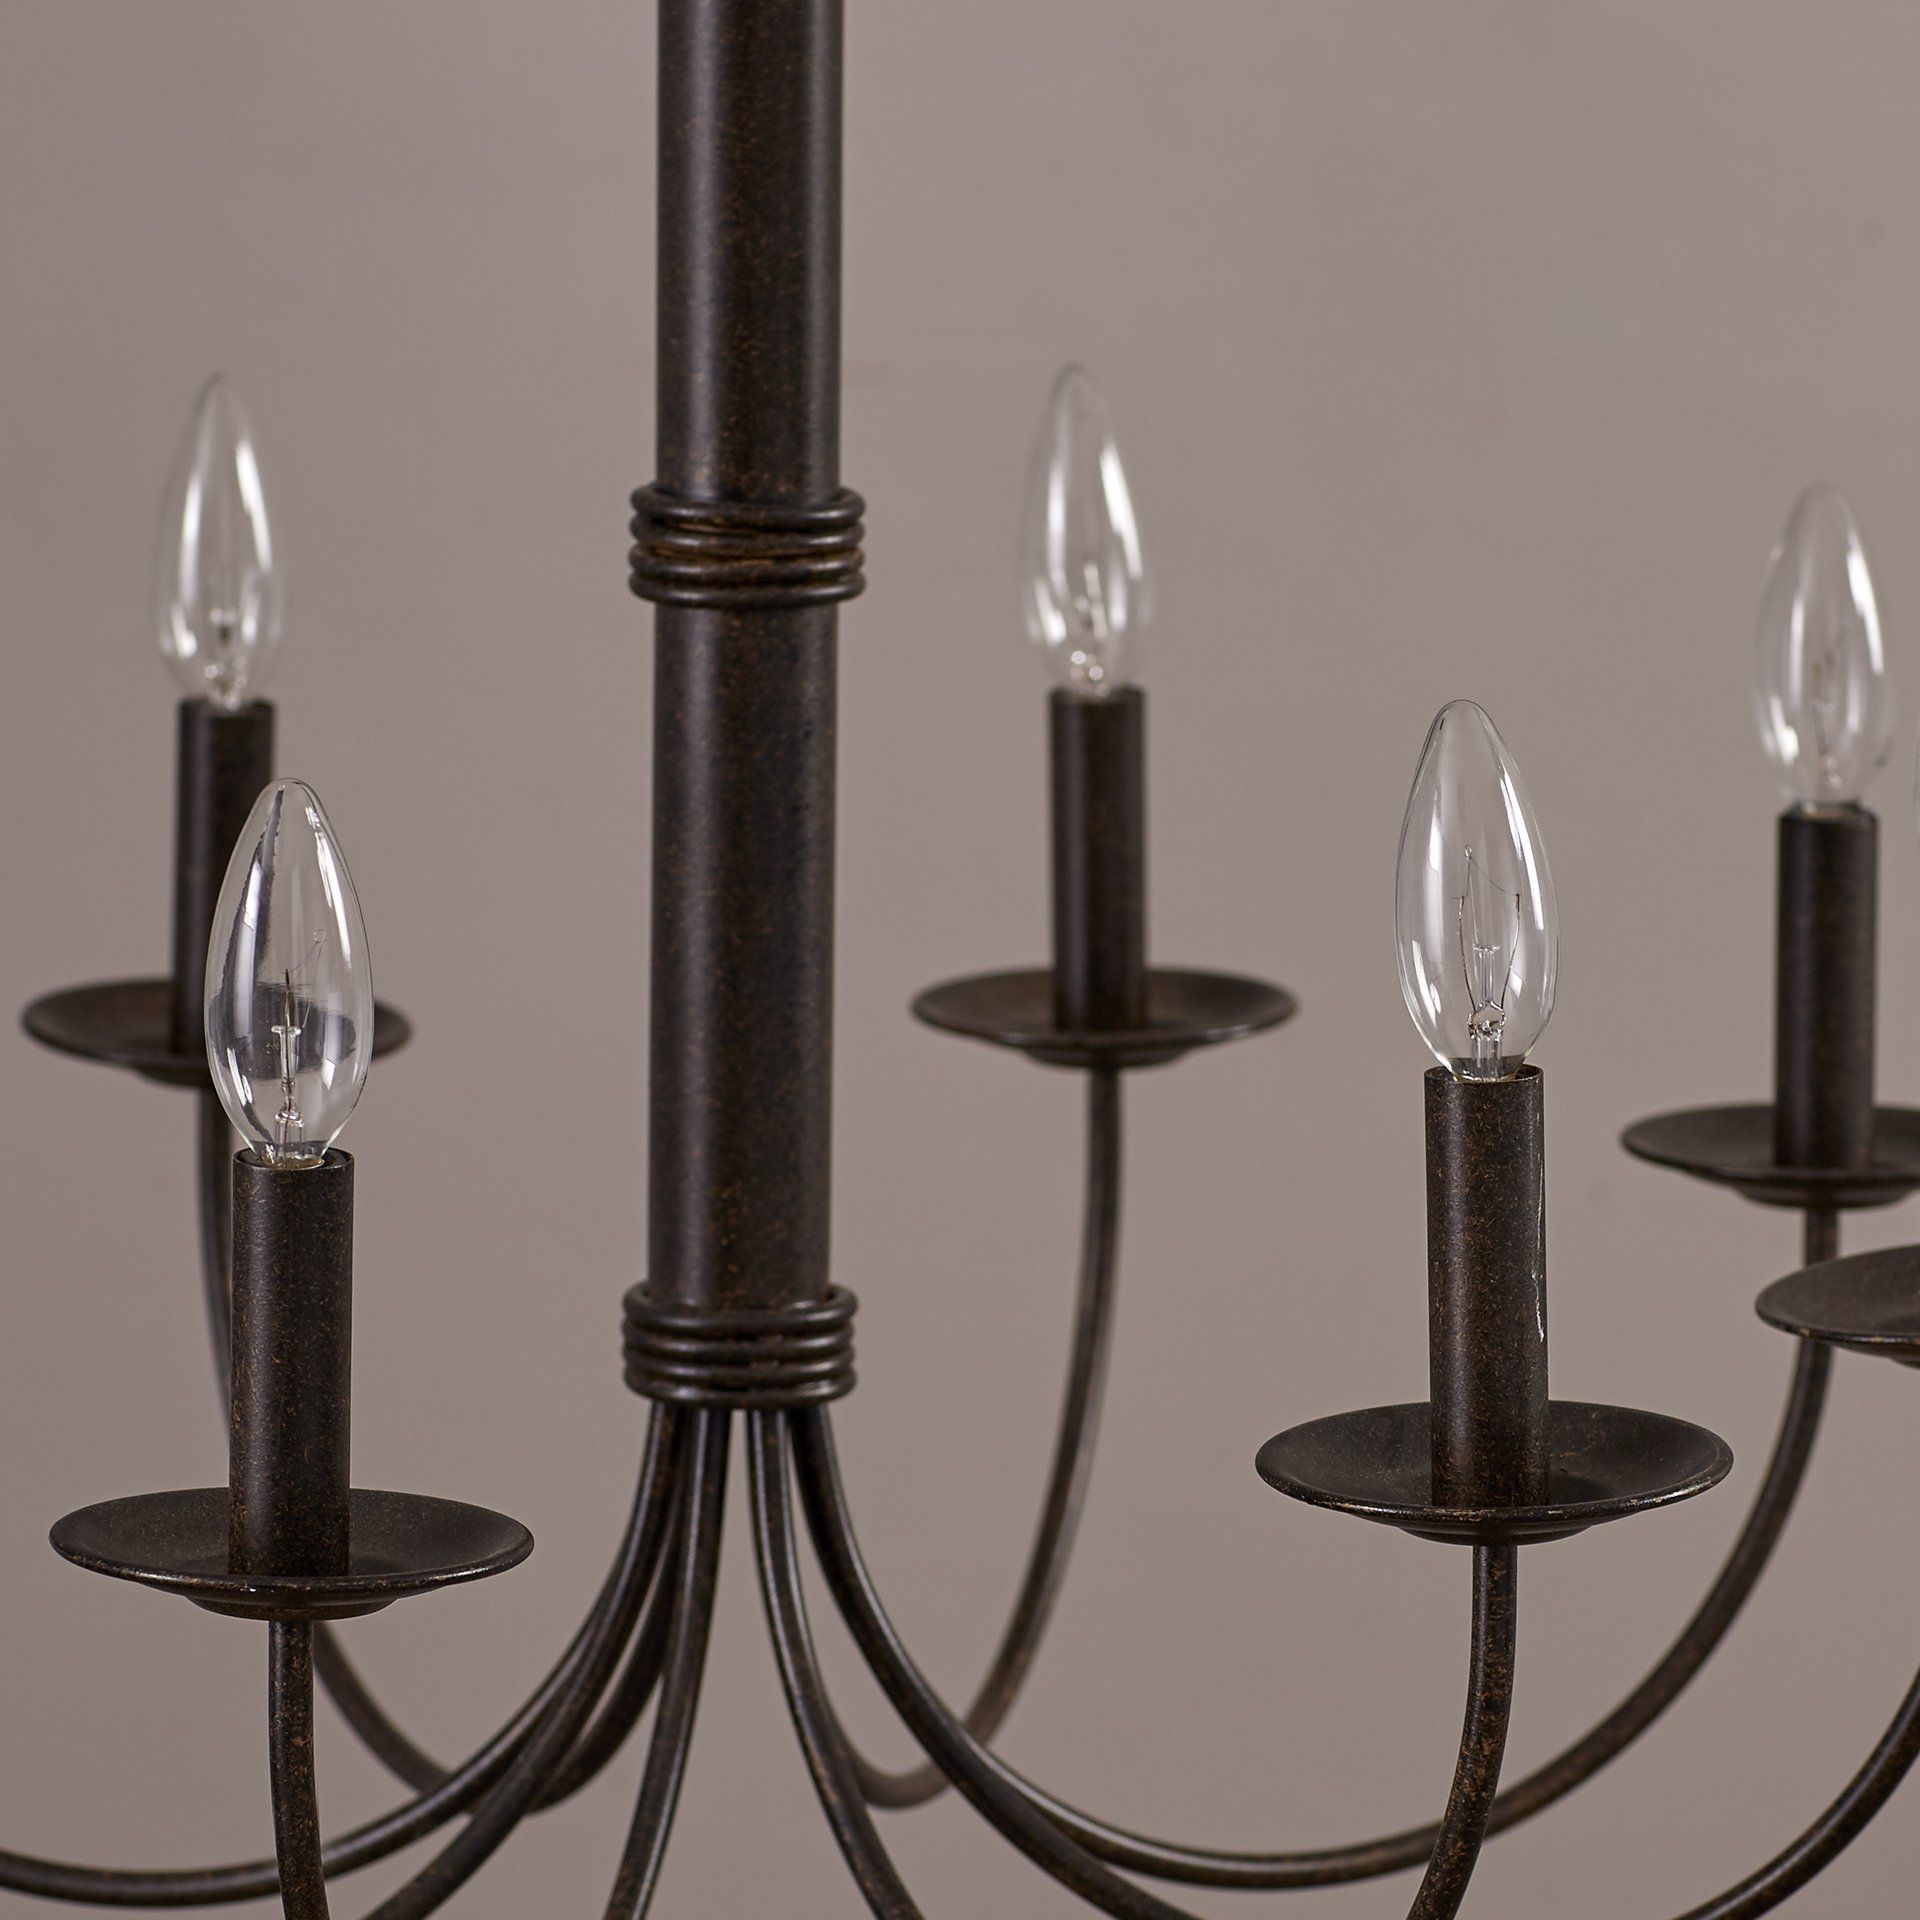 Lark Manor 8 Light Candle Style Chandelier Reviews Wayfair With Candle Light Chandelier (Photo 5 of 12)